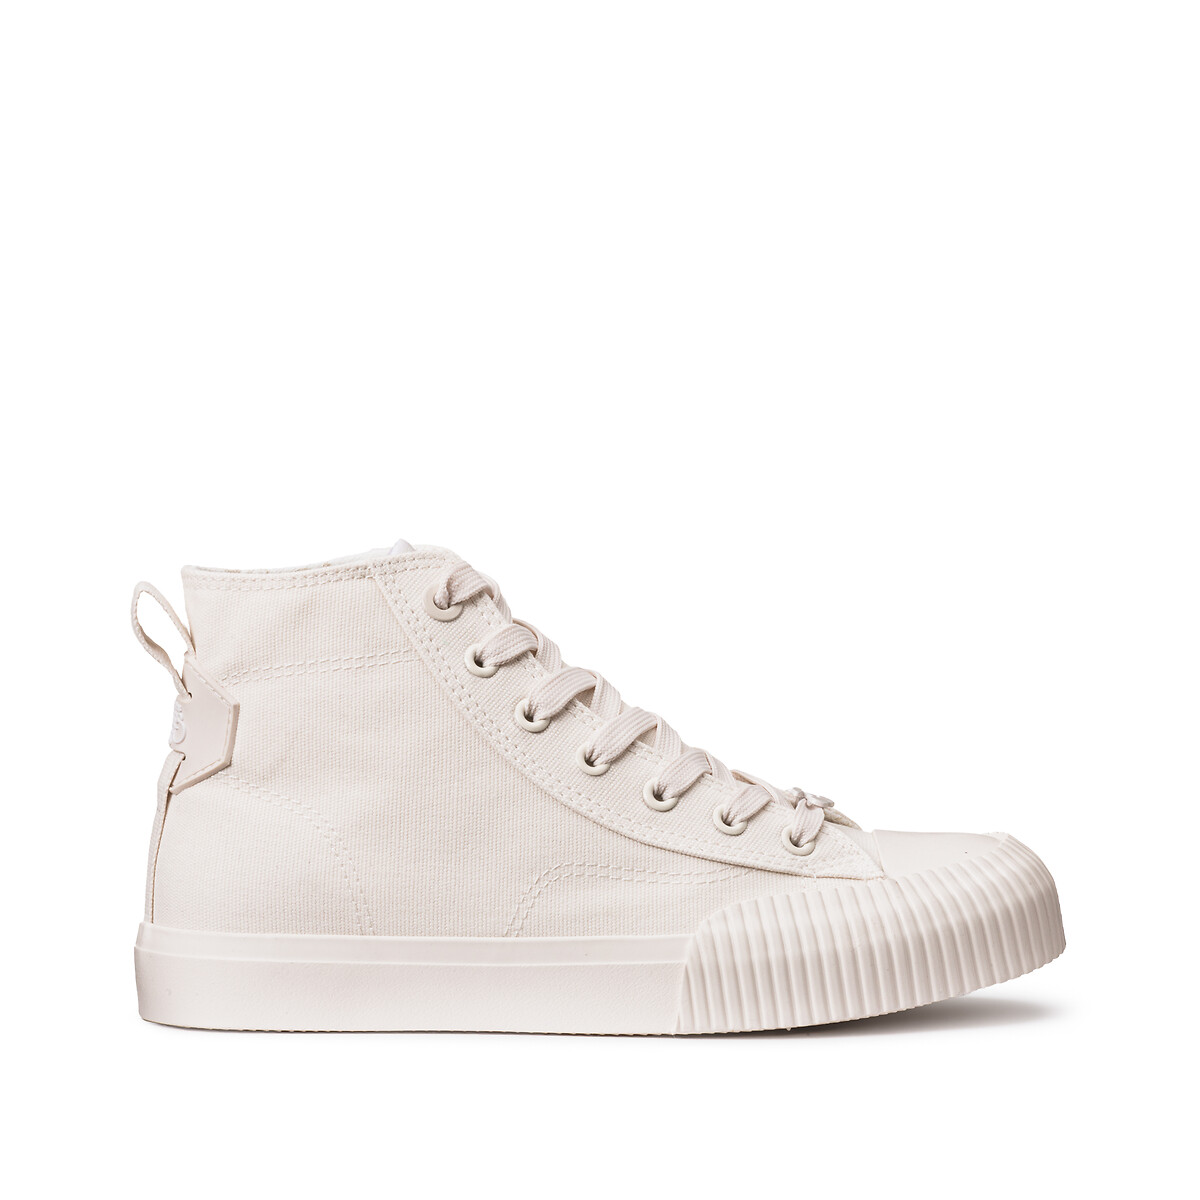 Harlow High Top Trainers in Canvas